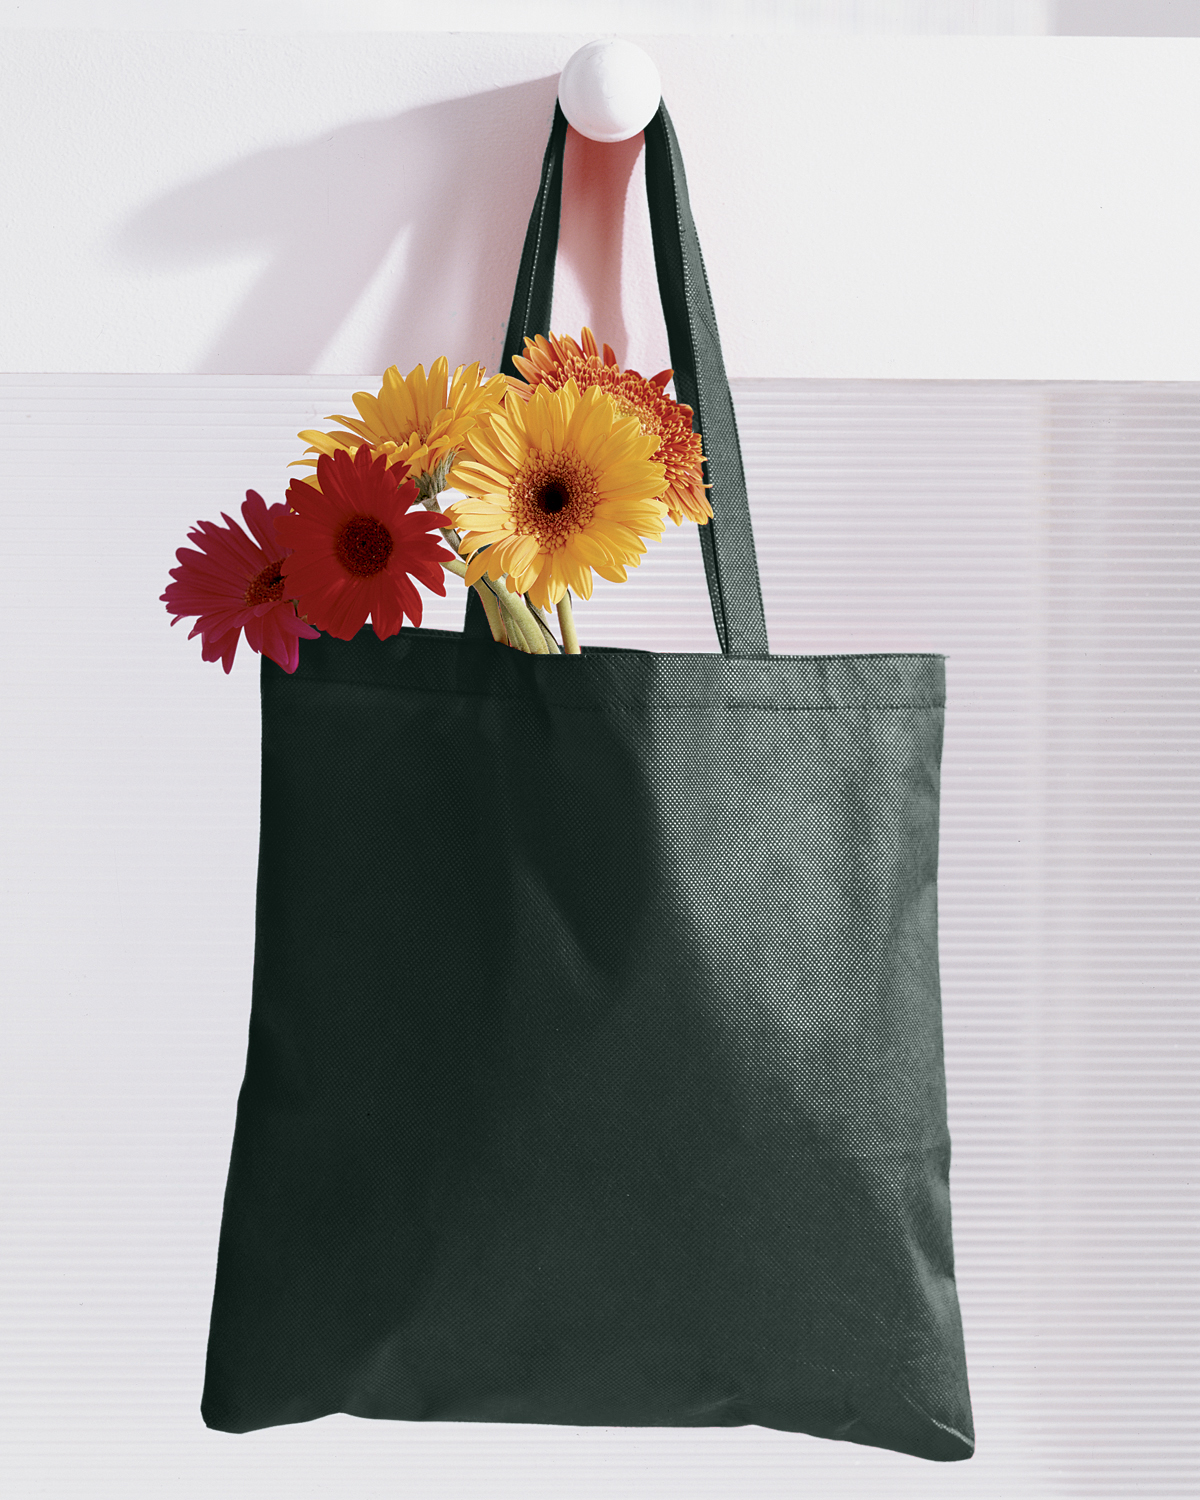 BAGedge BE003 8 oz. Canvas Tote $3.66 - Bags